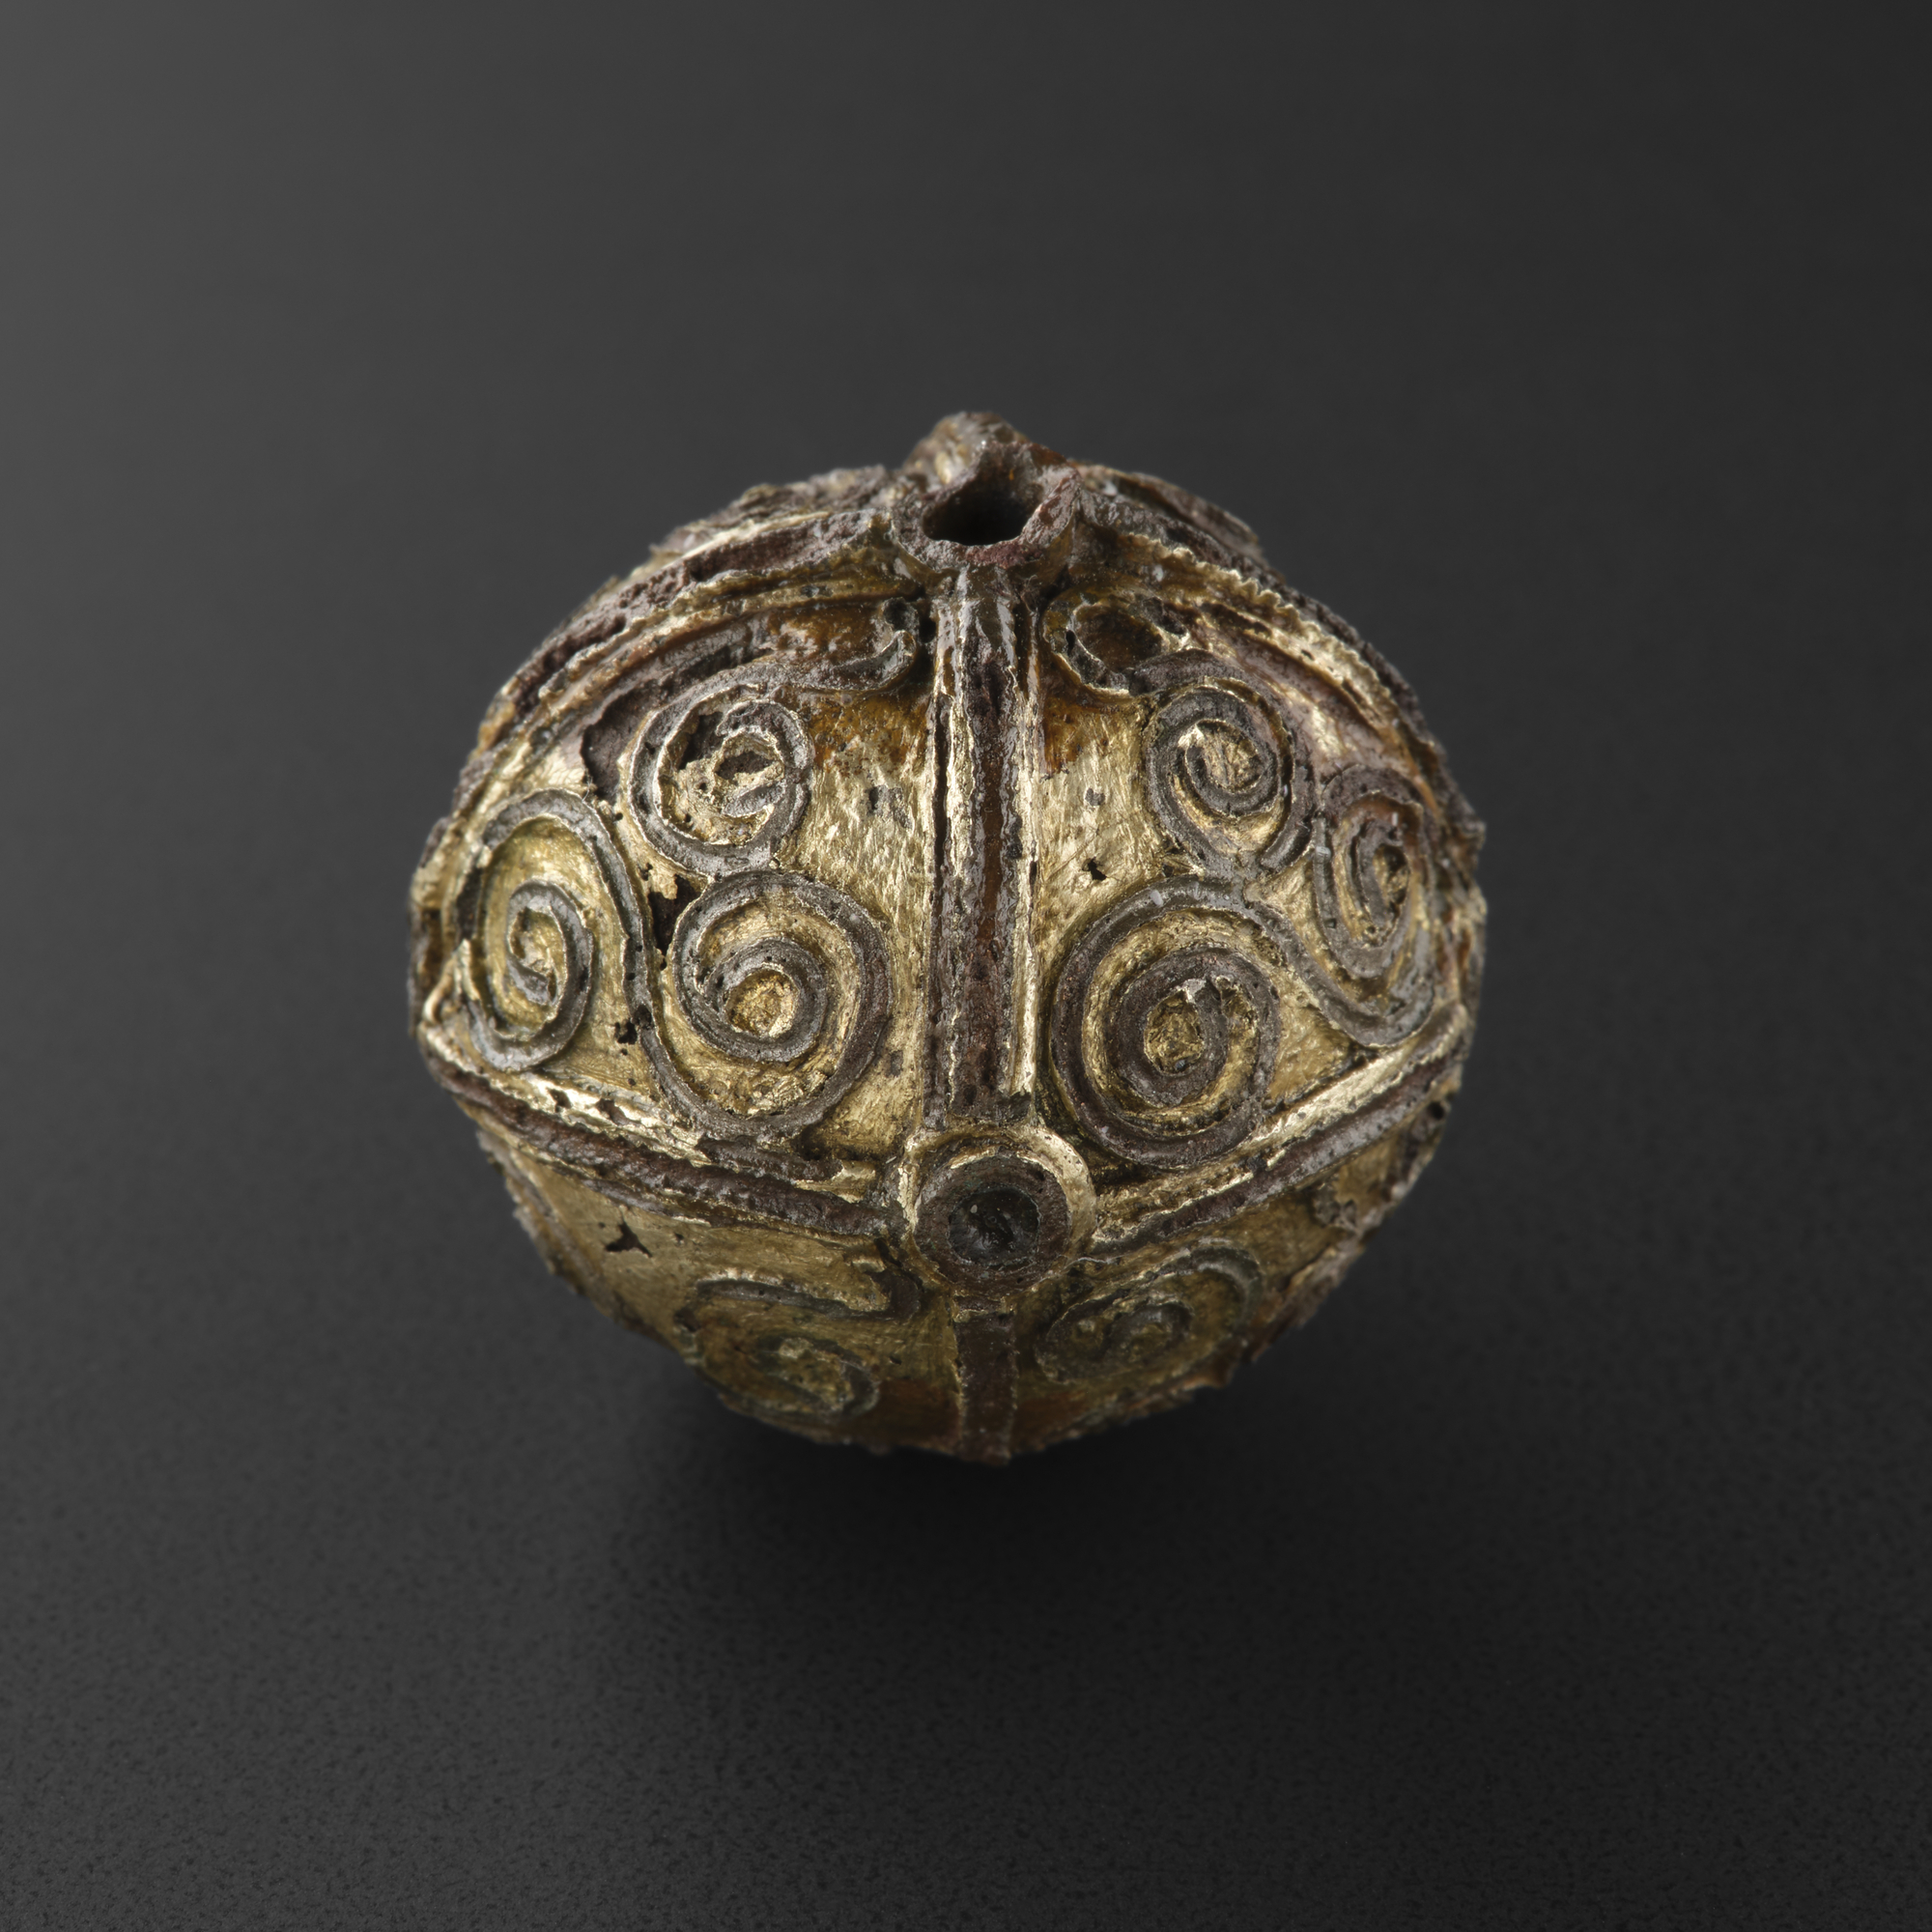 Image of Globular pinhead ornamented with quadrants filled with triquetra scrolls of filigree work, from Talnotrie © National Museums Scotland